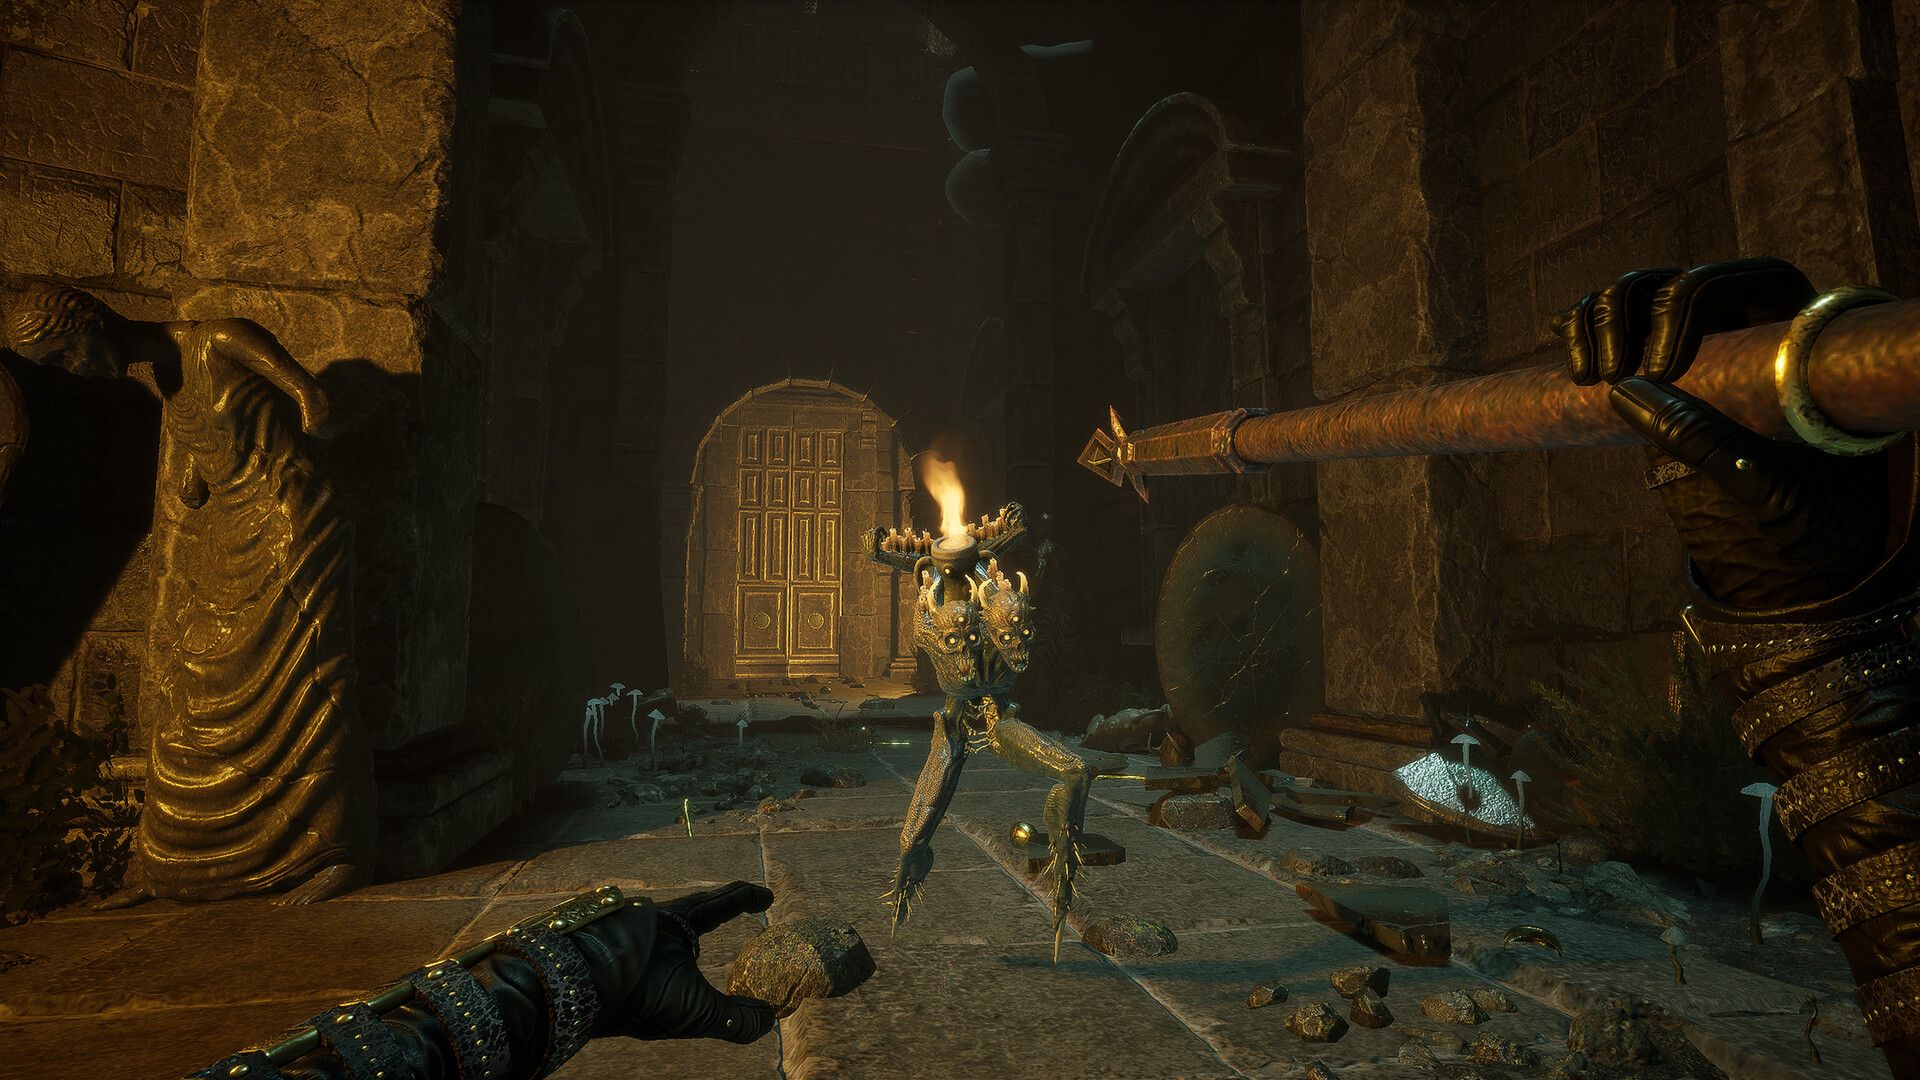 Player preparing to throw spear at two-headed enemy